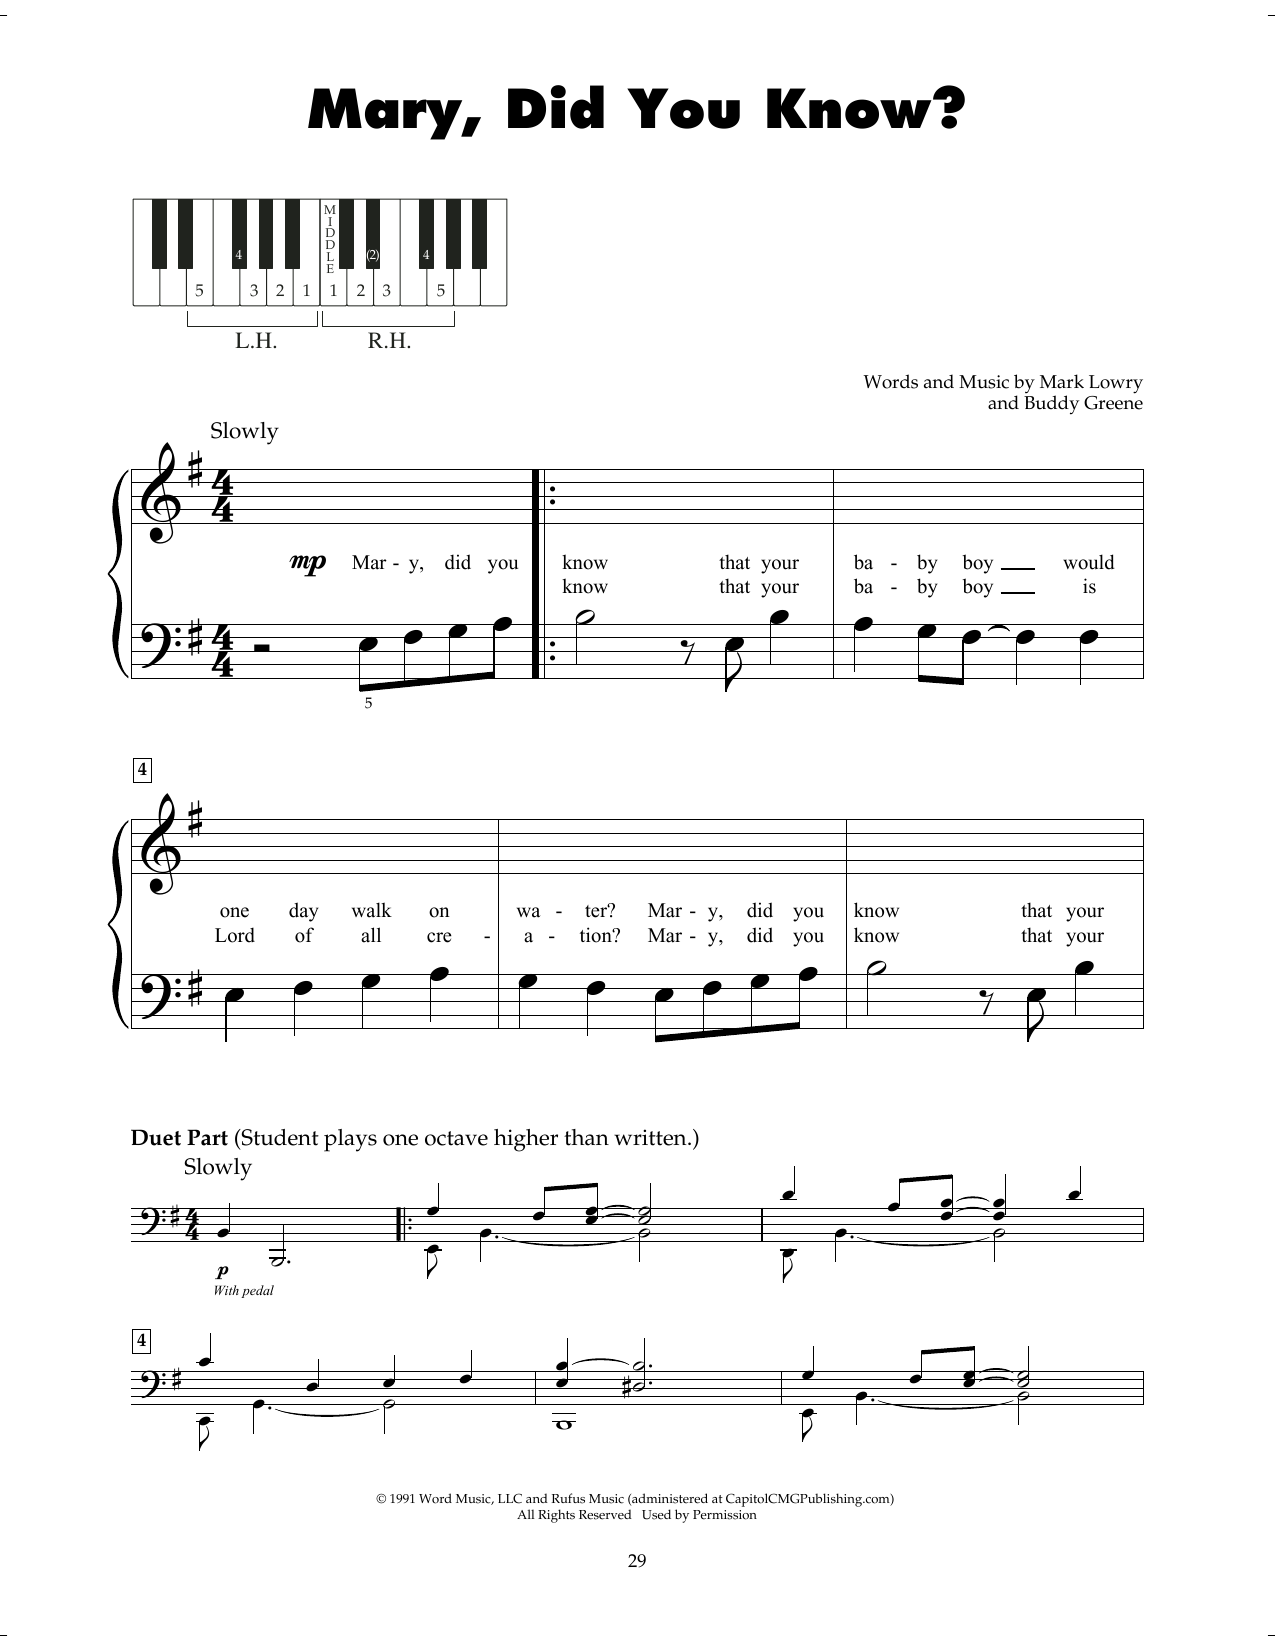 Mark Lowry Mary, Did You Know? sheet music notes printable PDF score